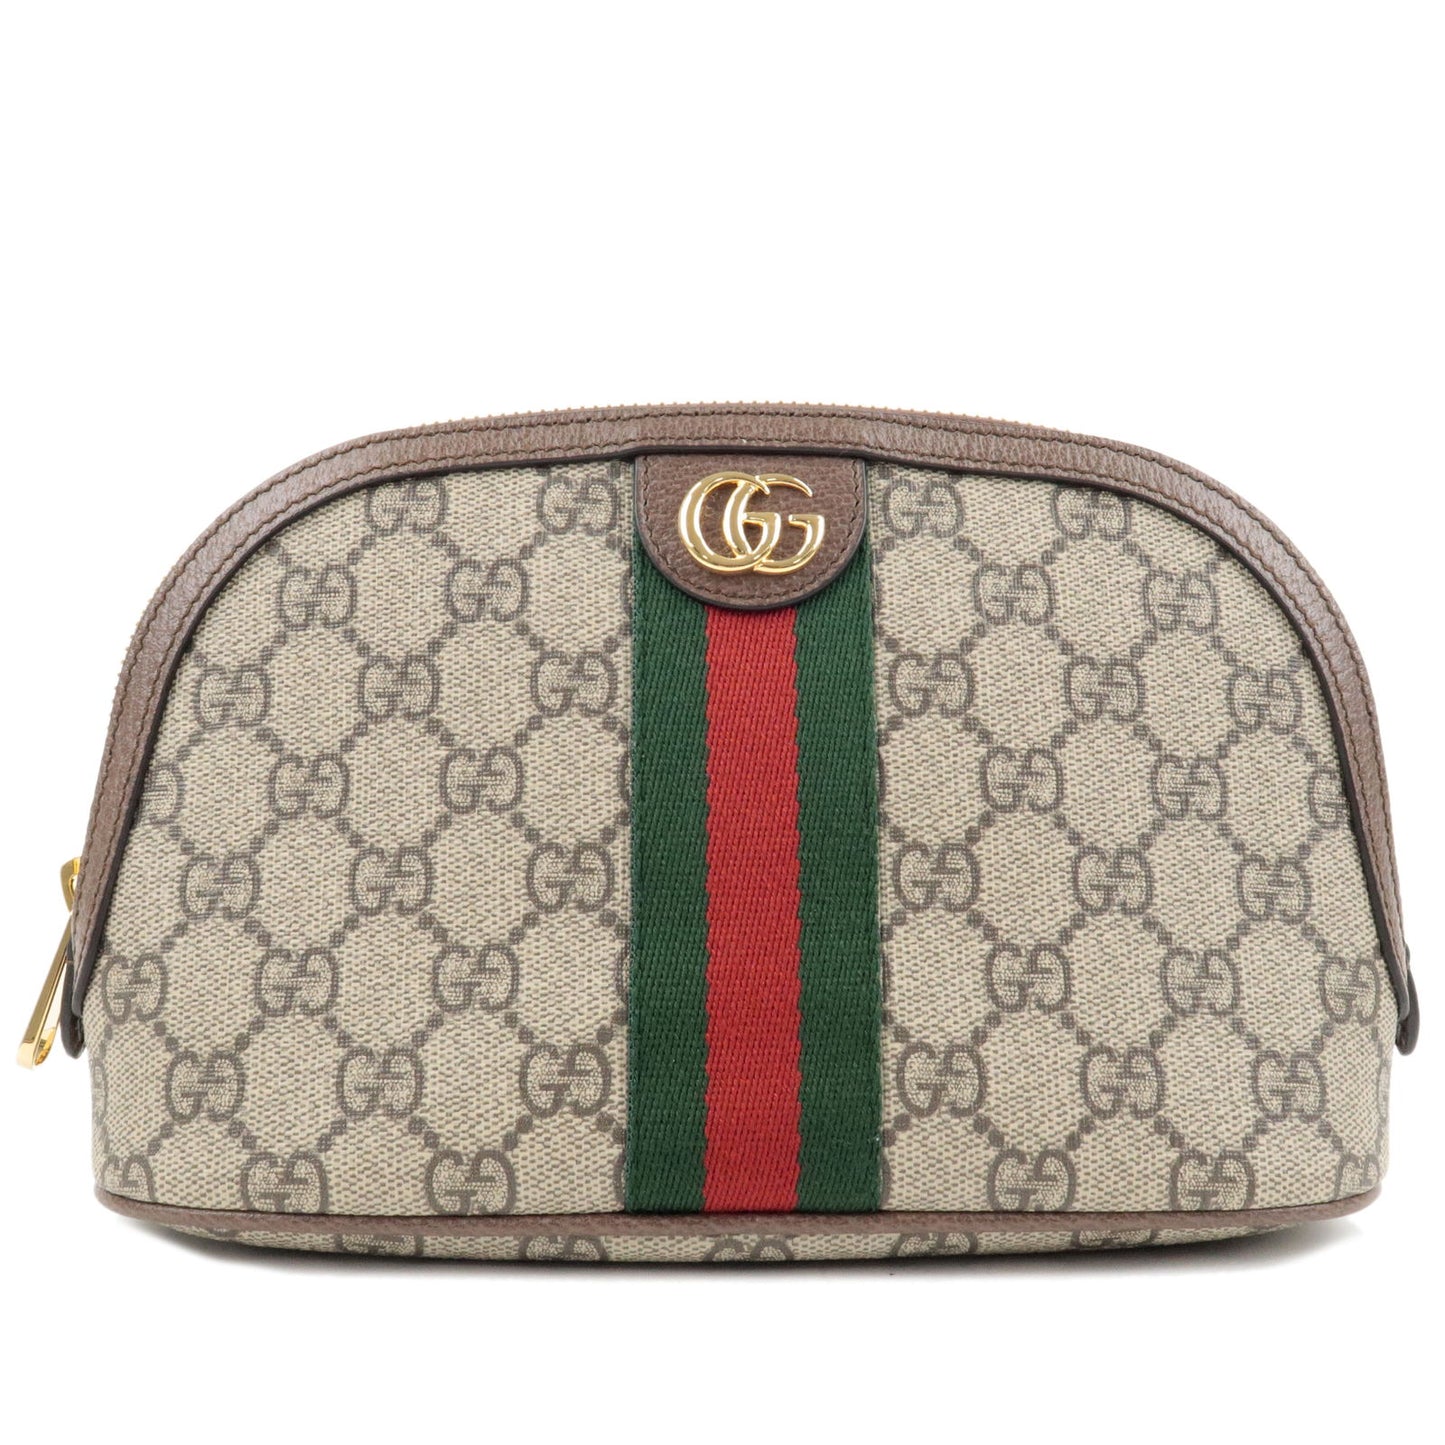 GUCCI-Sherry-Ophidia-GG-Supreme-Leather-Pouch-Brown-625551